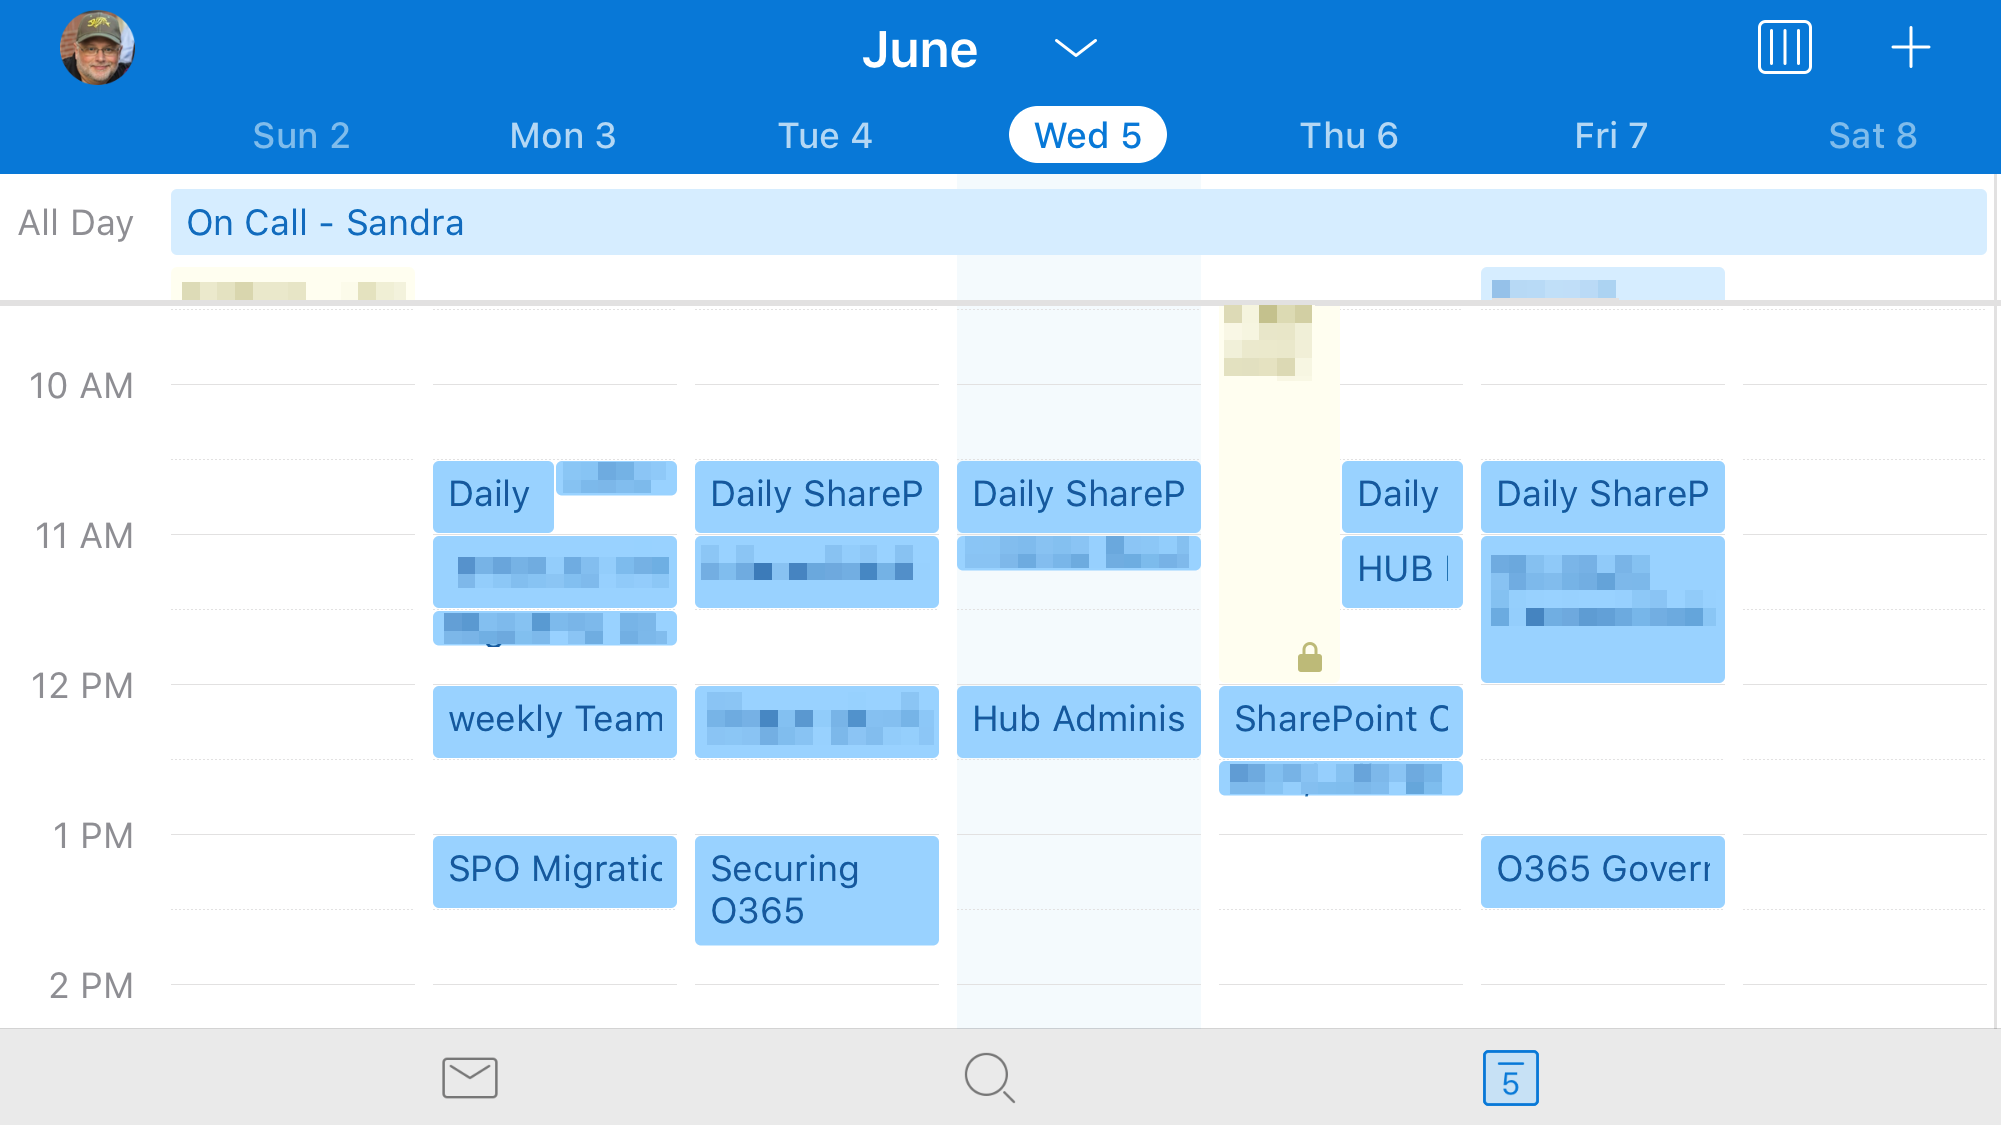 Seeing a weekly calendar view in the Outlook mobile app LaptrinhX / News